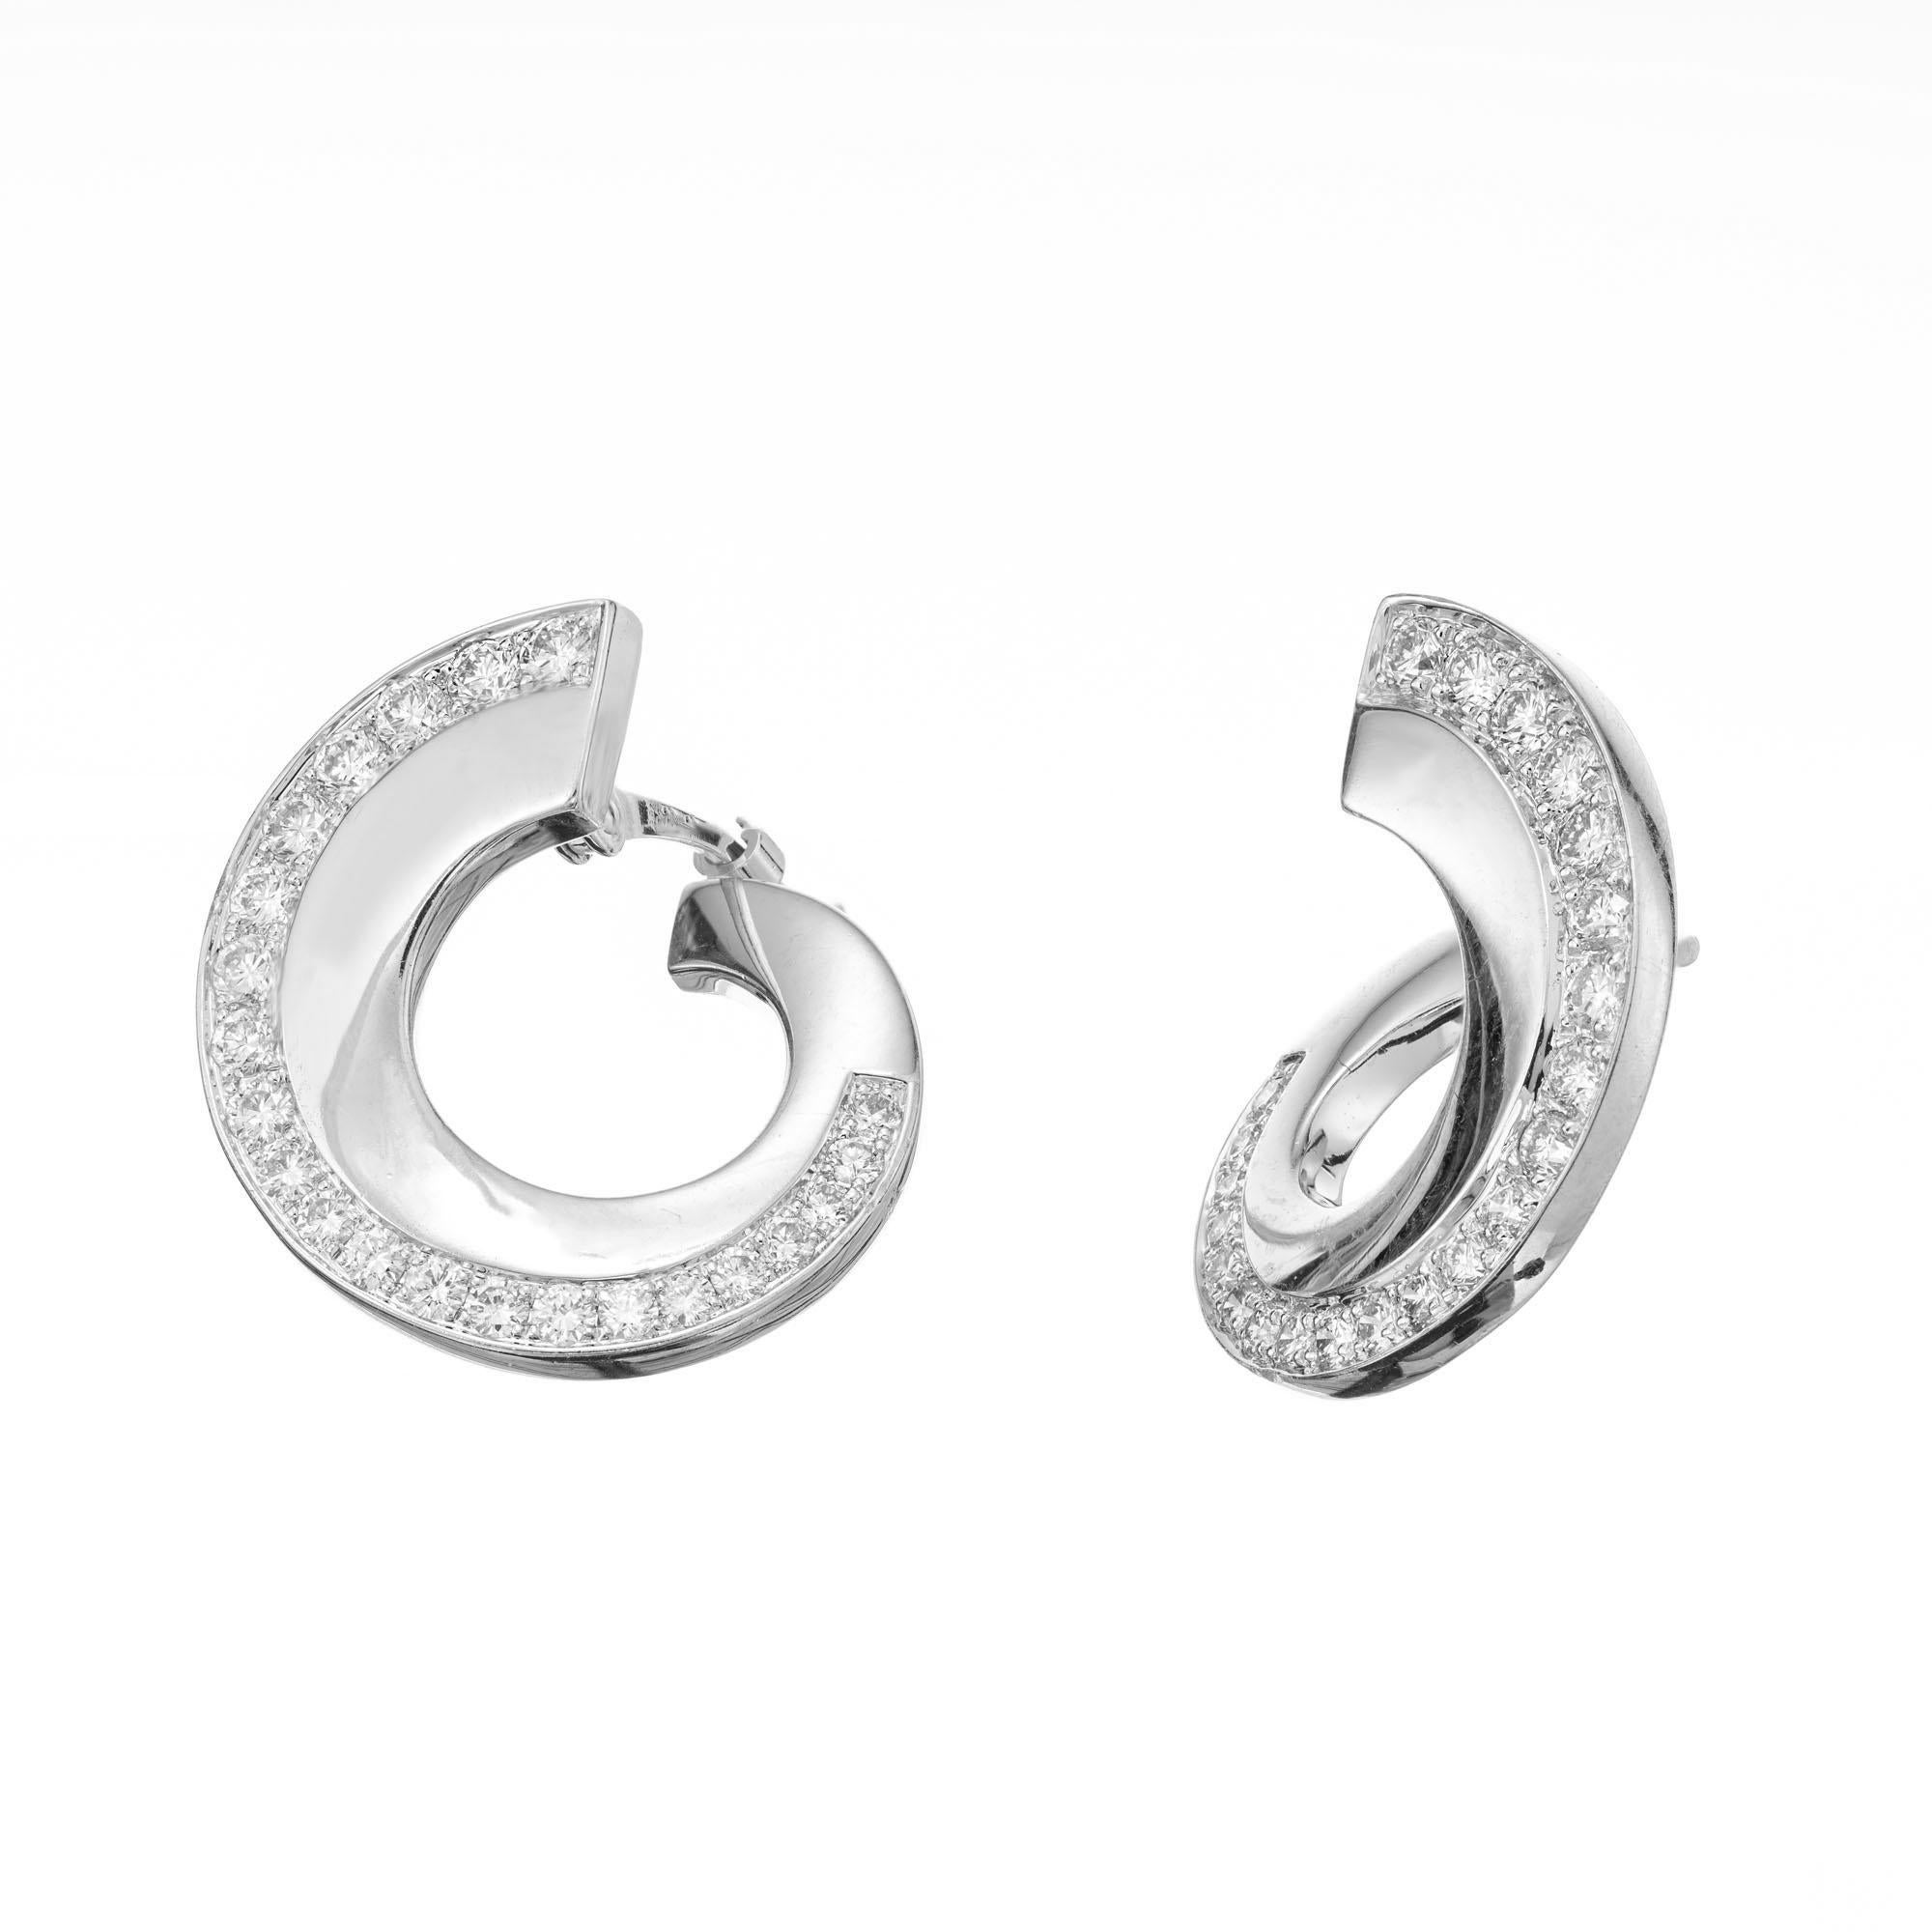 Swirl 18k white gold front to back diamond hoop earrings with hinged posts. 44 round full cut diamonds. 

44 round full cut diamonds, approx. total weight .75cts, F, VS
18k white gold
Tested: 18k
Stamped: 750
6.5 grams
Top to bottom: 17.88mm or .70